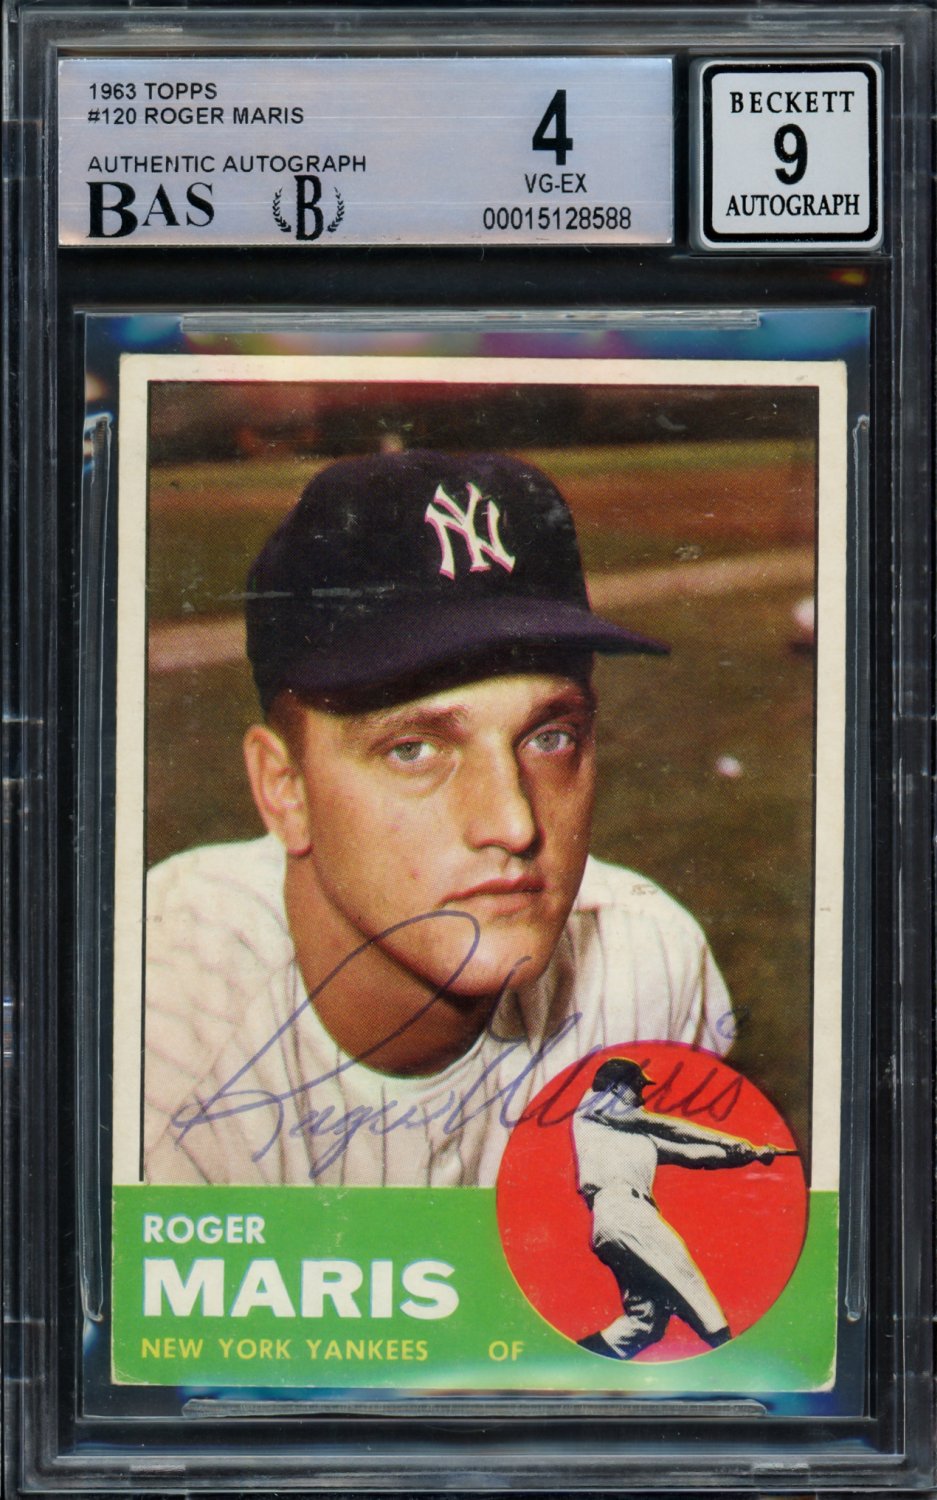 Roger Maris Autographed Signed 1963 Topps Card #120 New York